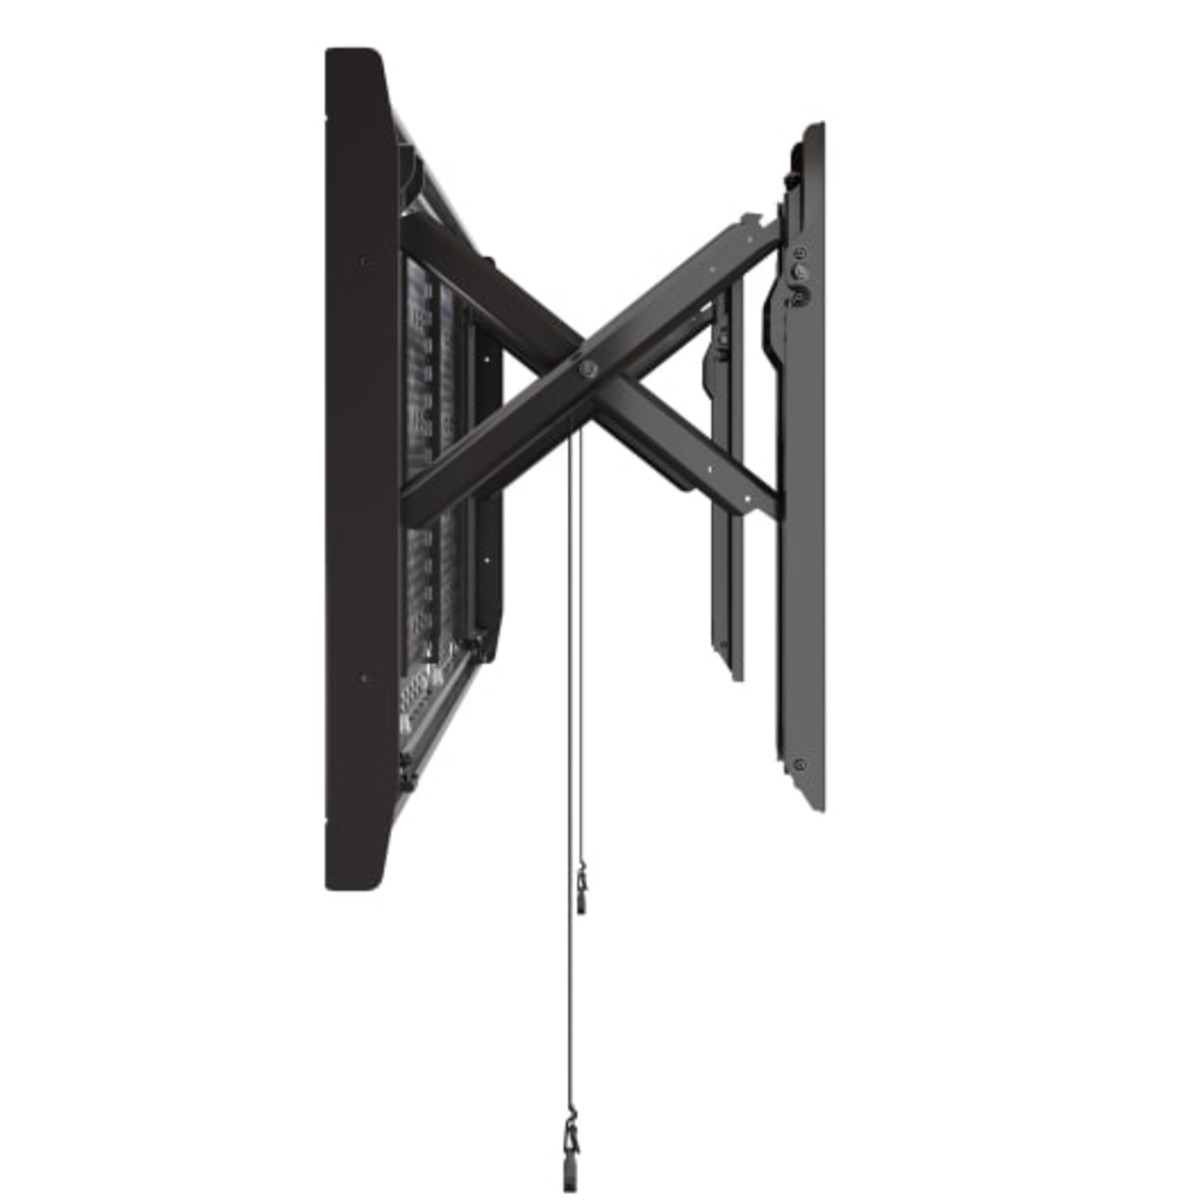 TEMPO FP WALL MOUNT SYSTEM